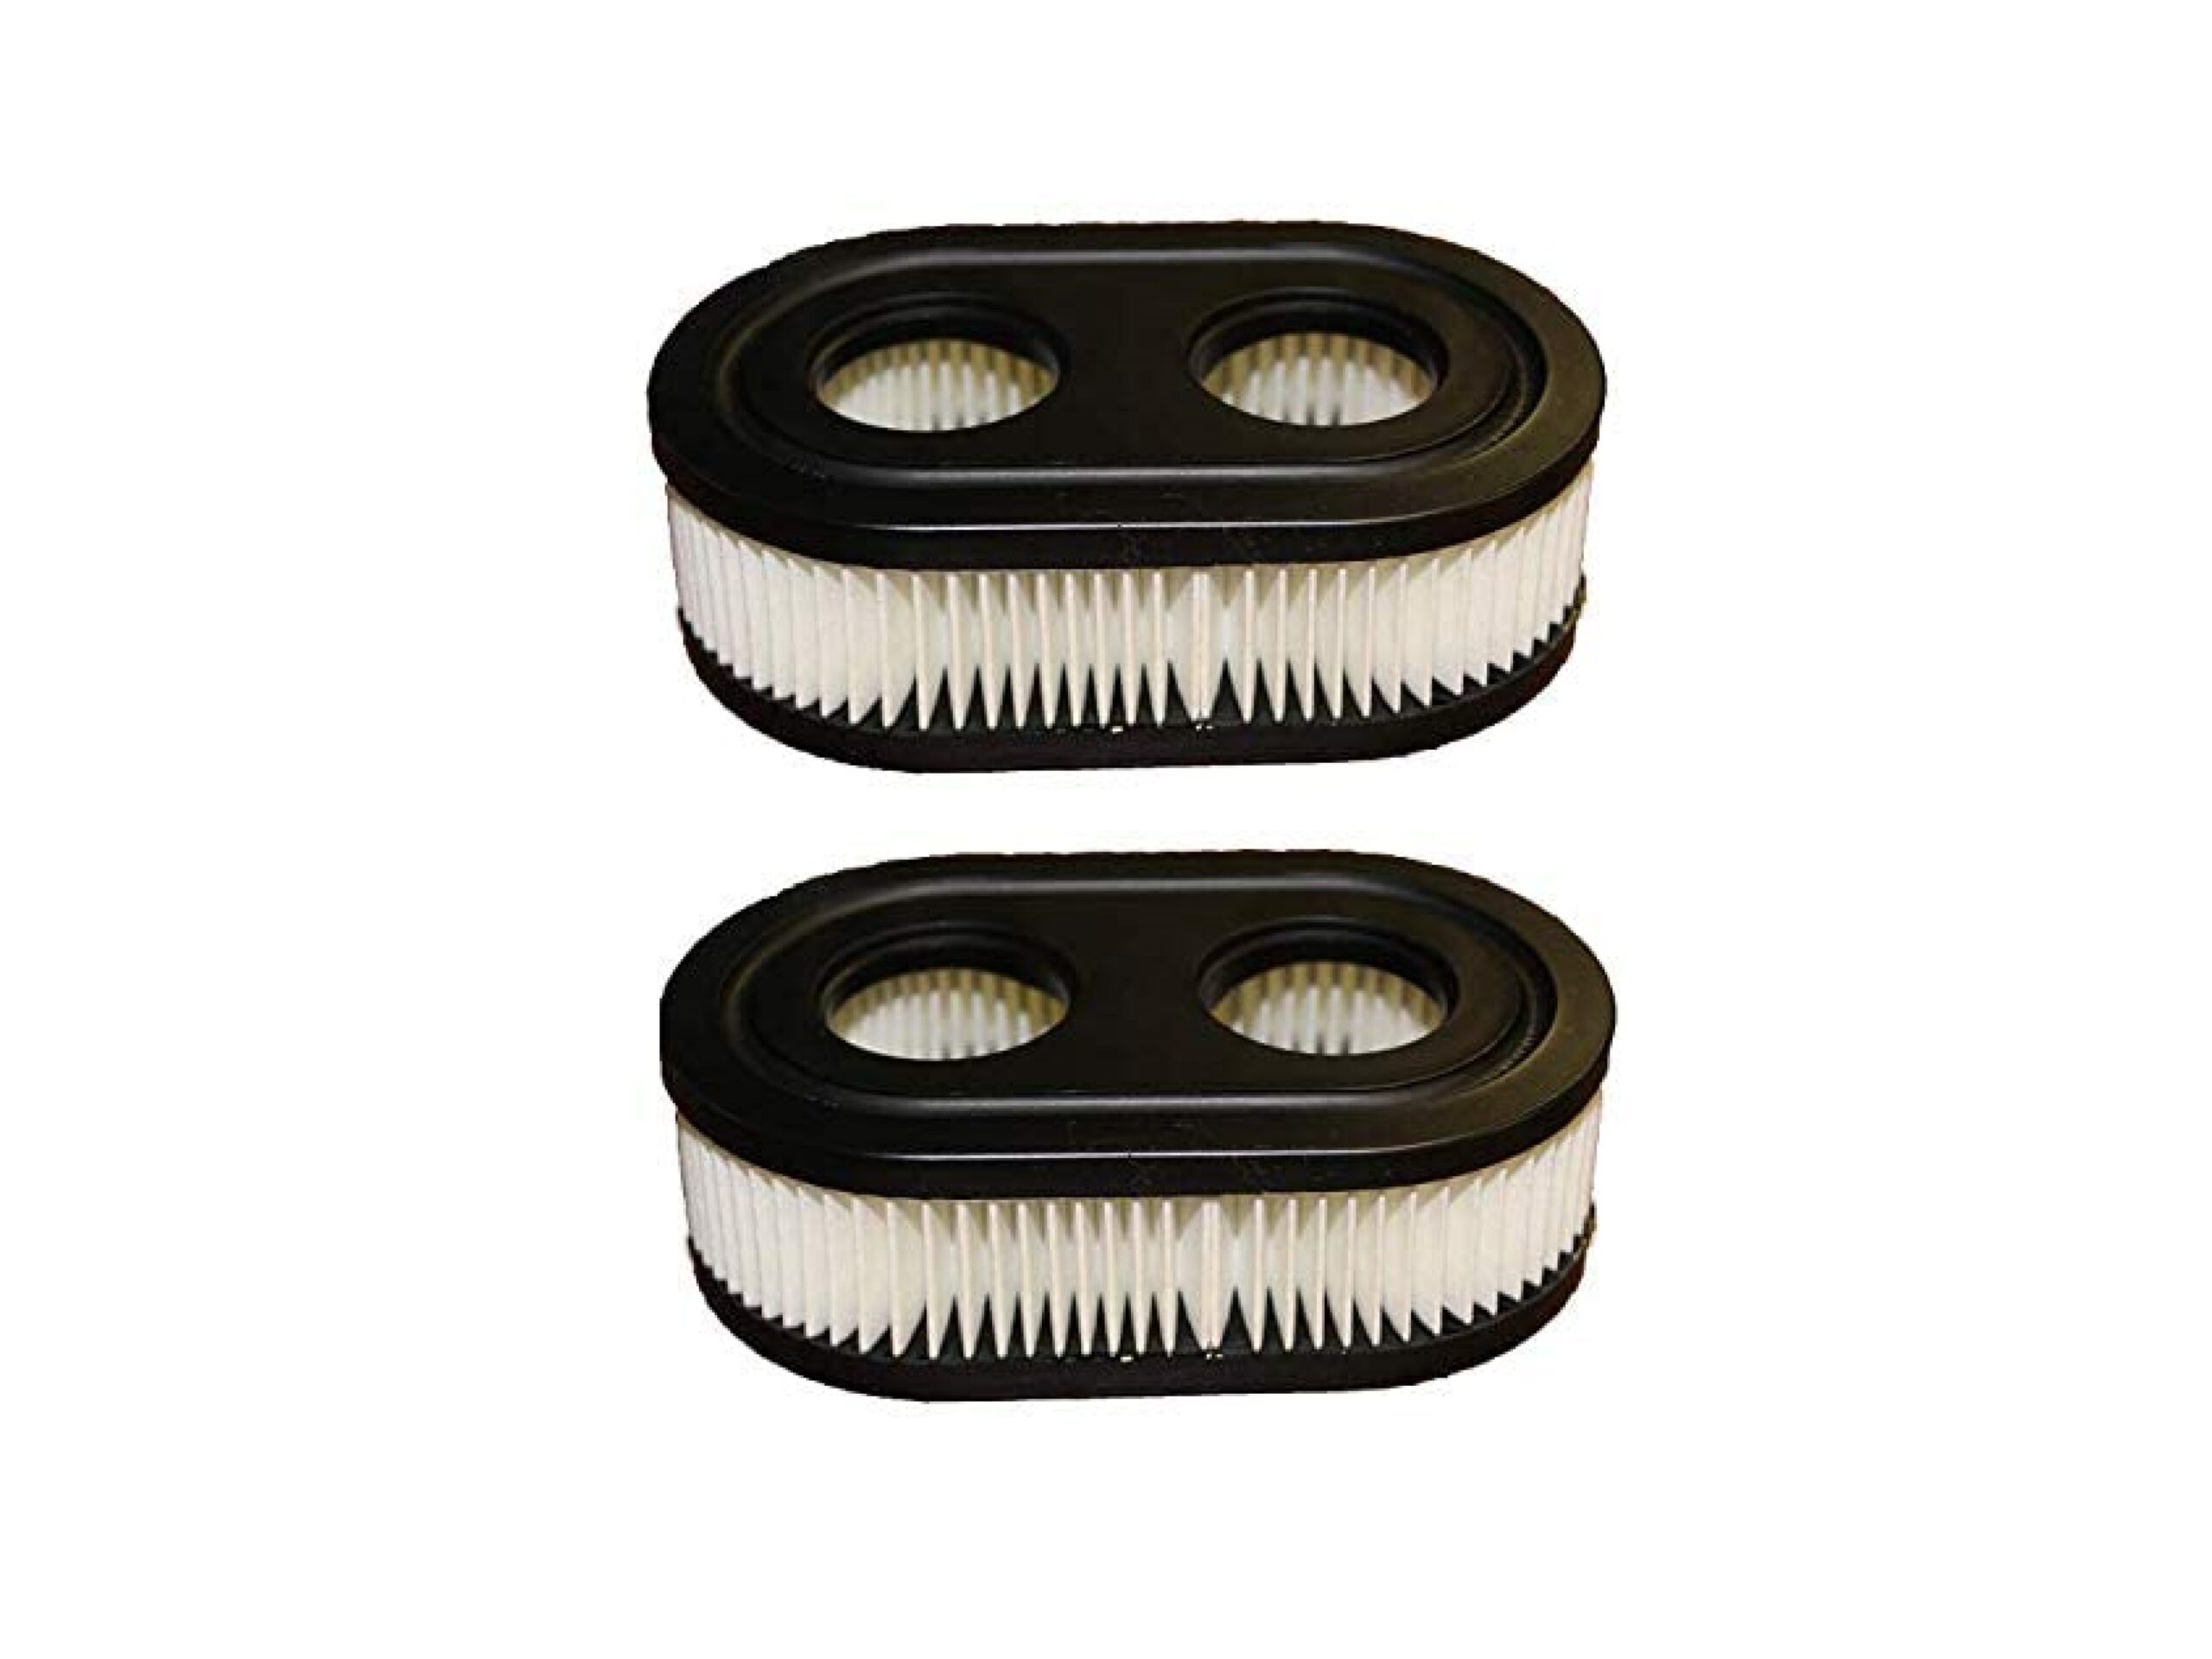 Yongxing air filter 593260 798452 series engine 4247 5432 5432K 09P702 lawn mower Briggs and Stratton air filter element 2 pack 